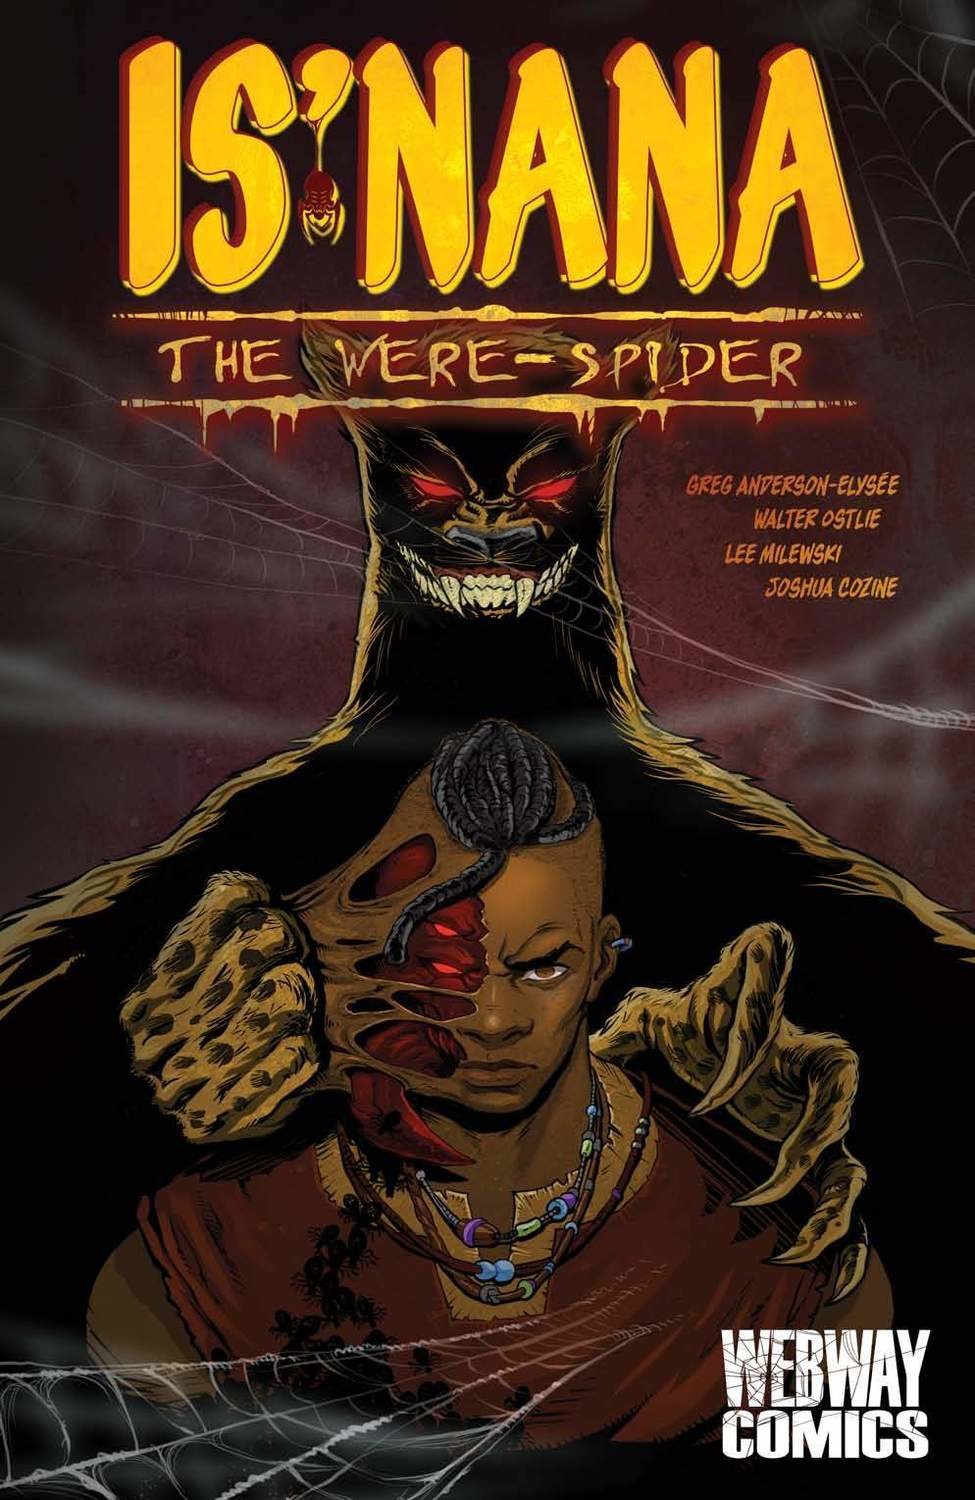 Is'nana the Were-Spider Vol 1: Forgotten Stories Trade Paperback